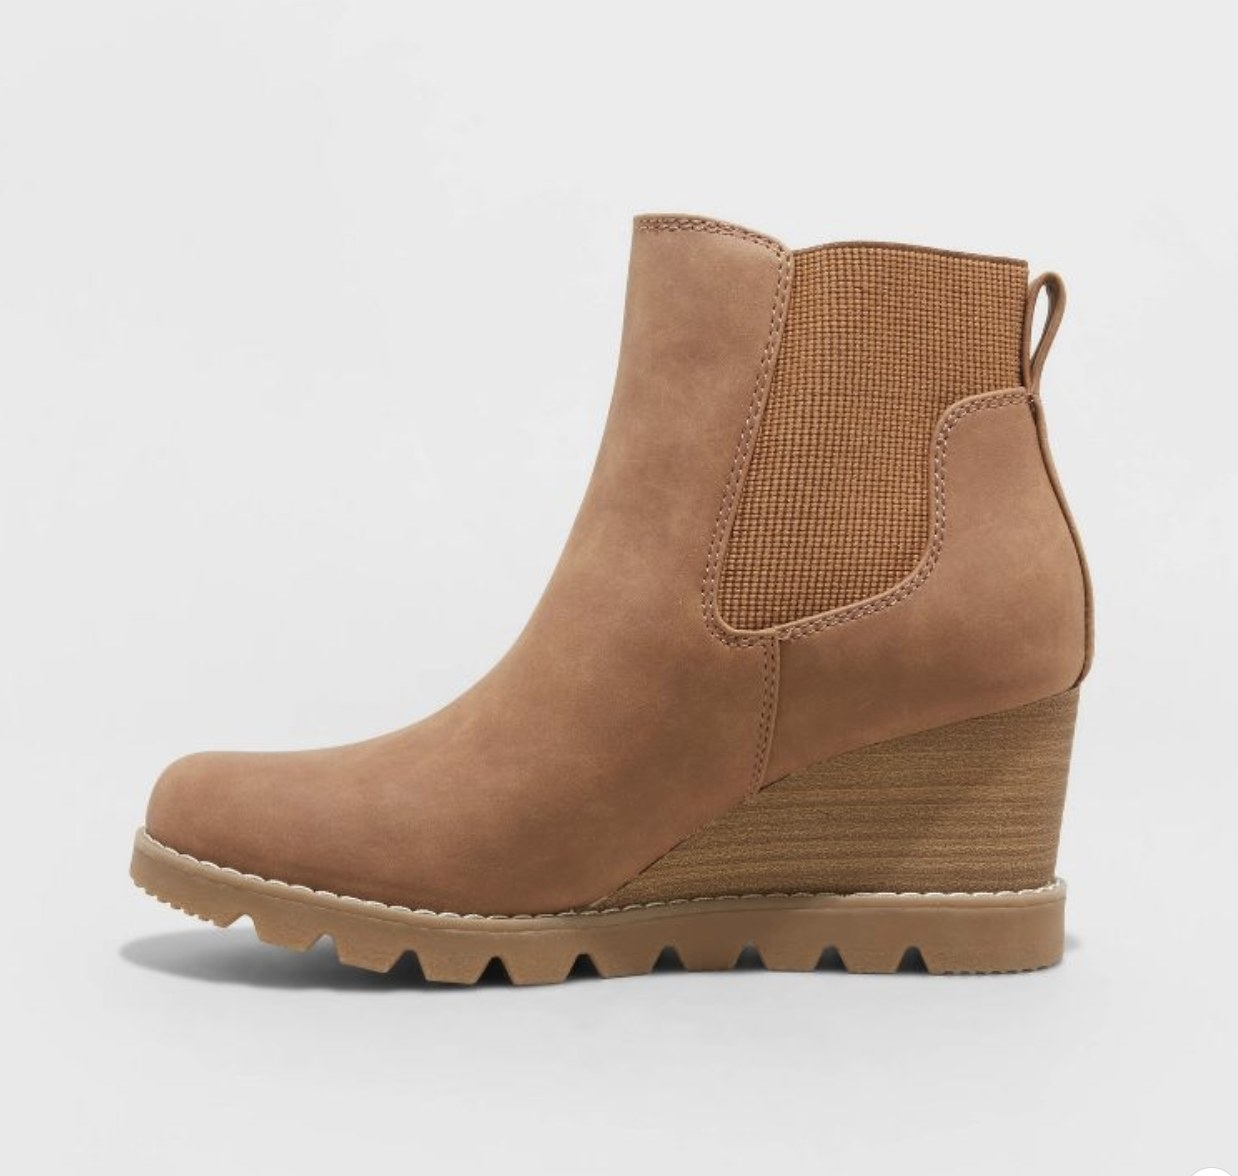 A tan wedge chelsea boot